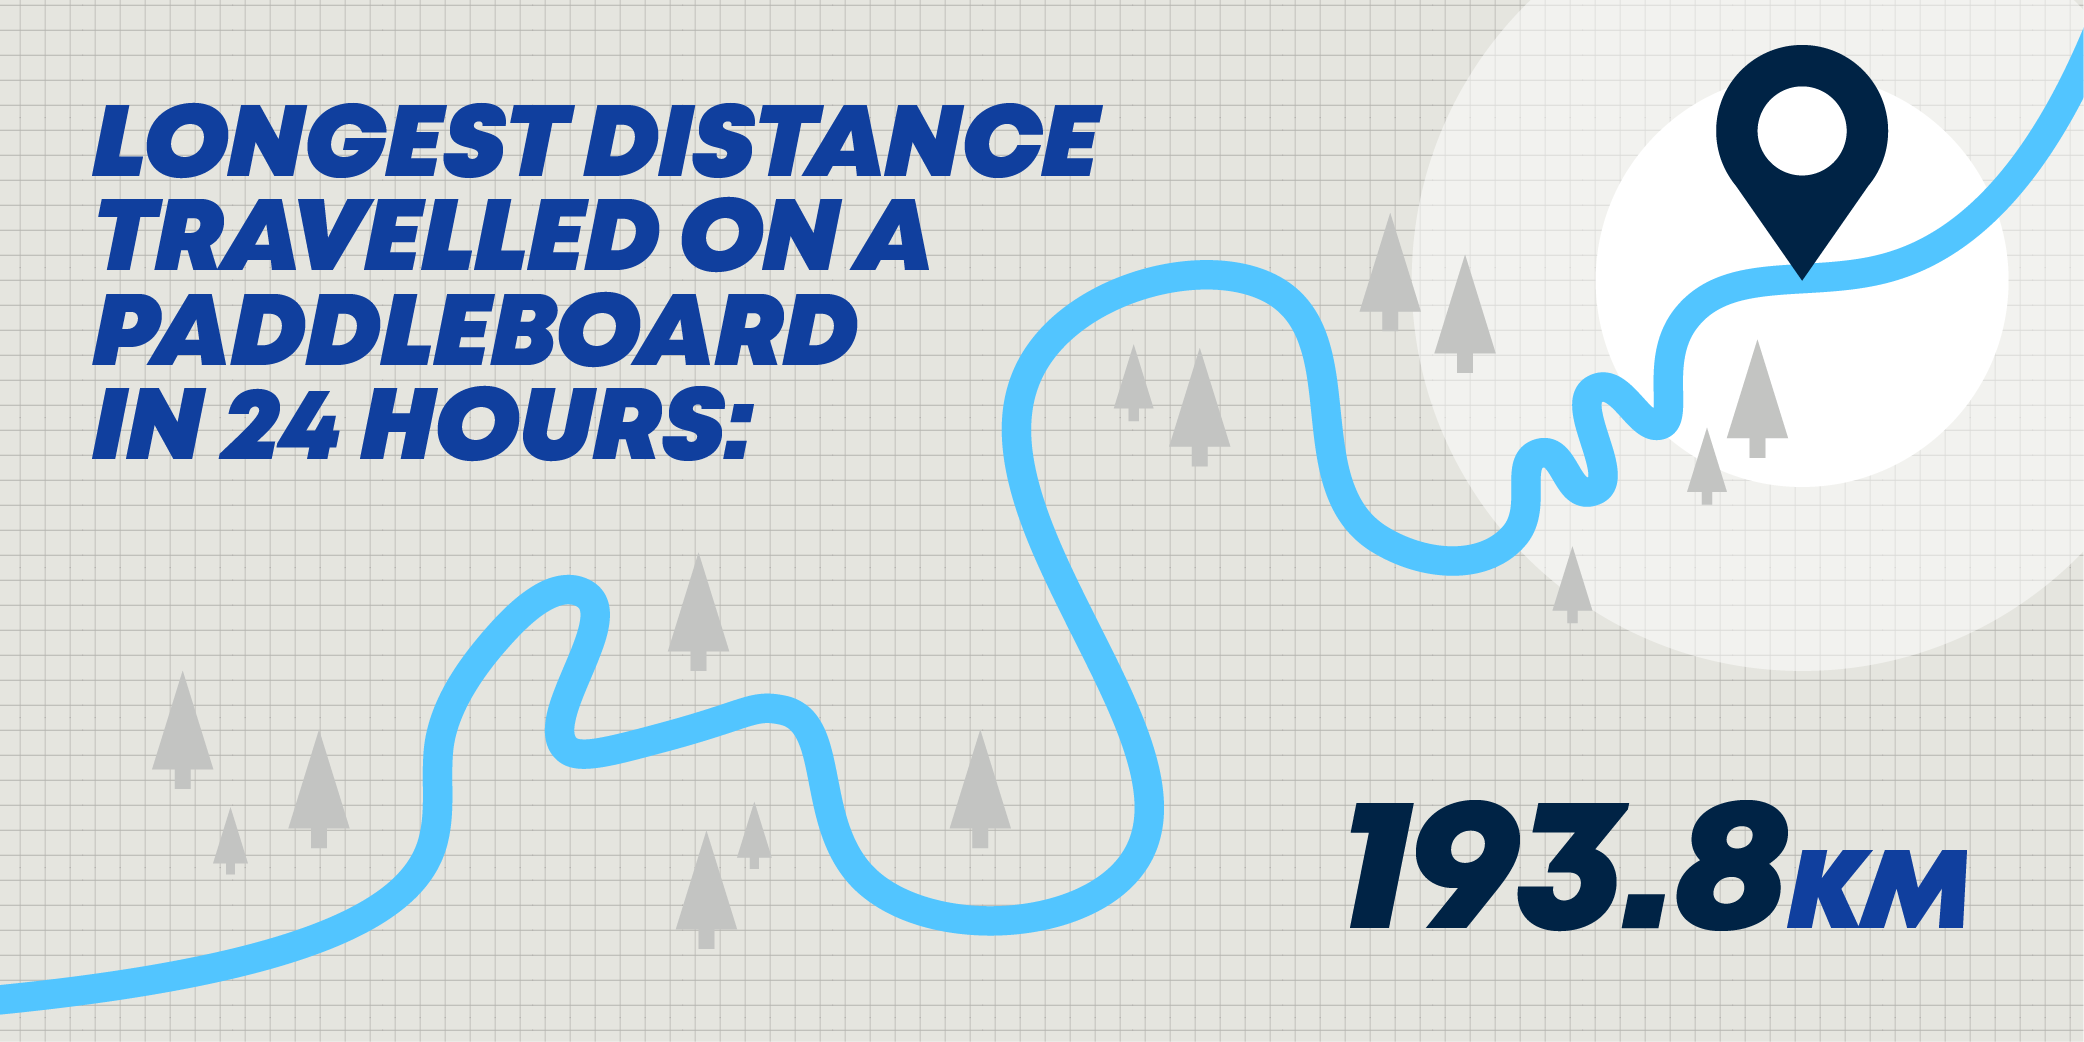 Graphic about the longest distance travelled on a paddle board in 24 hours